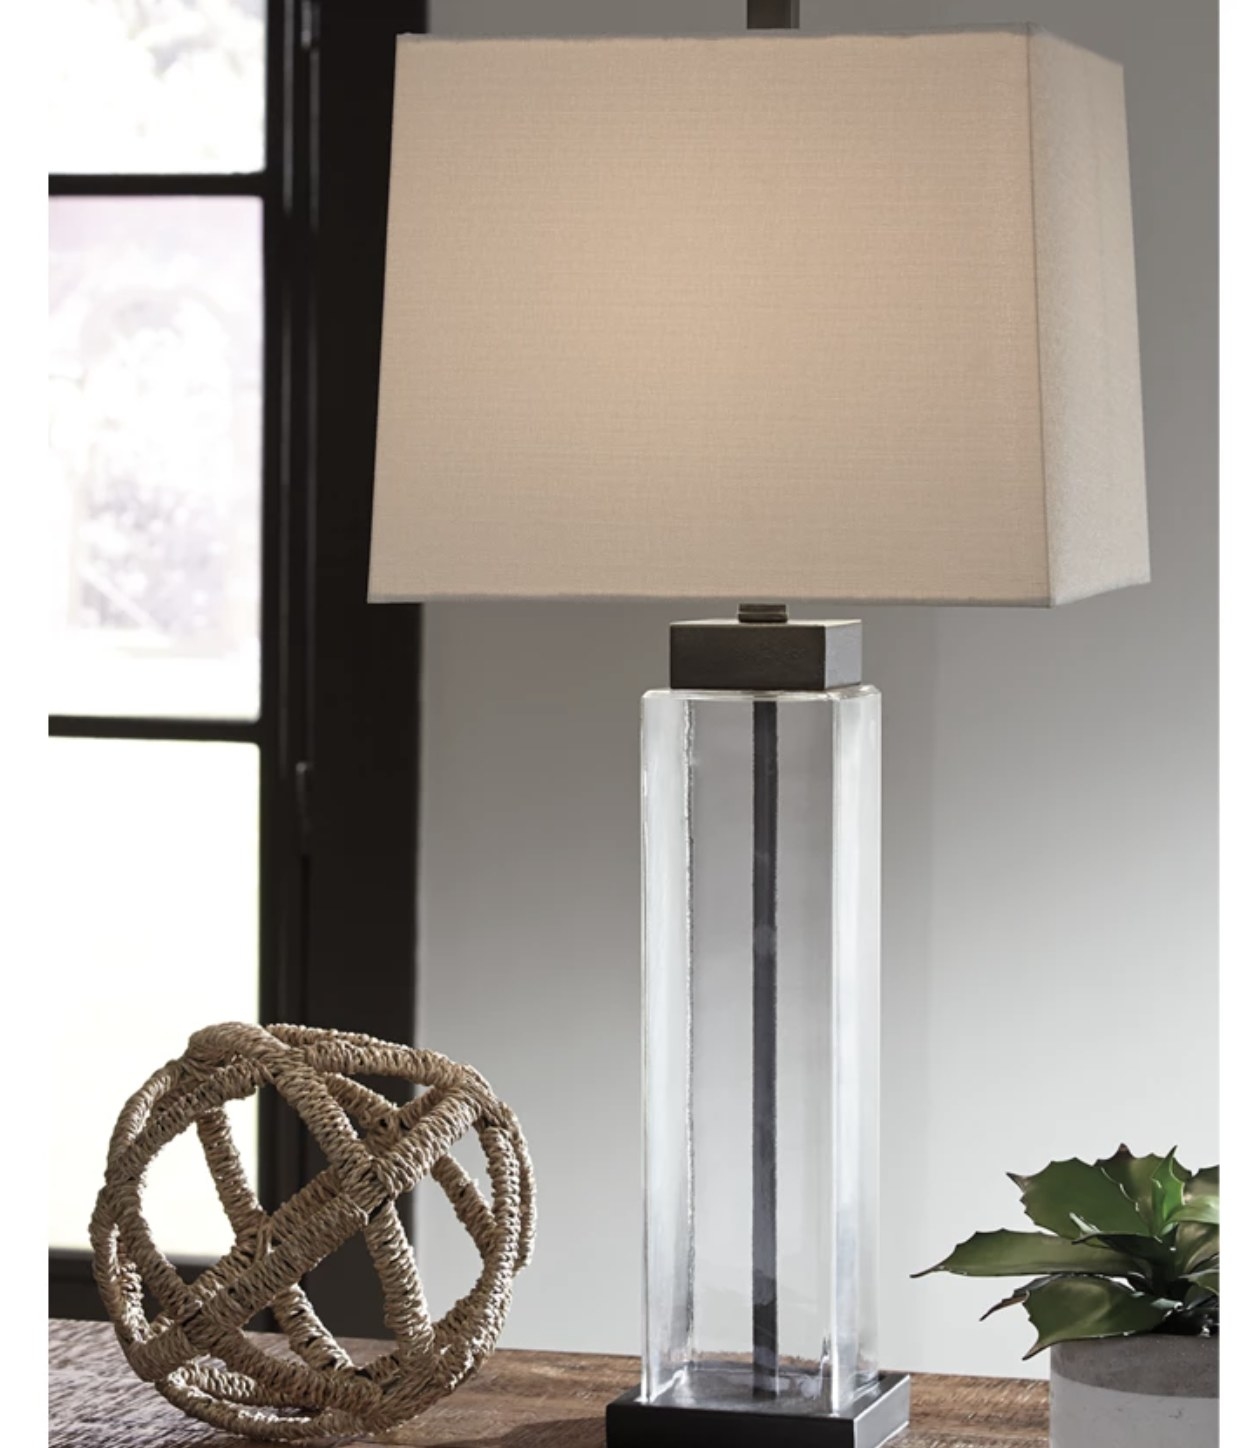 A glass table lamp